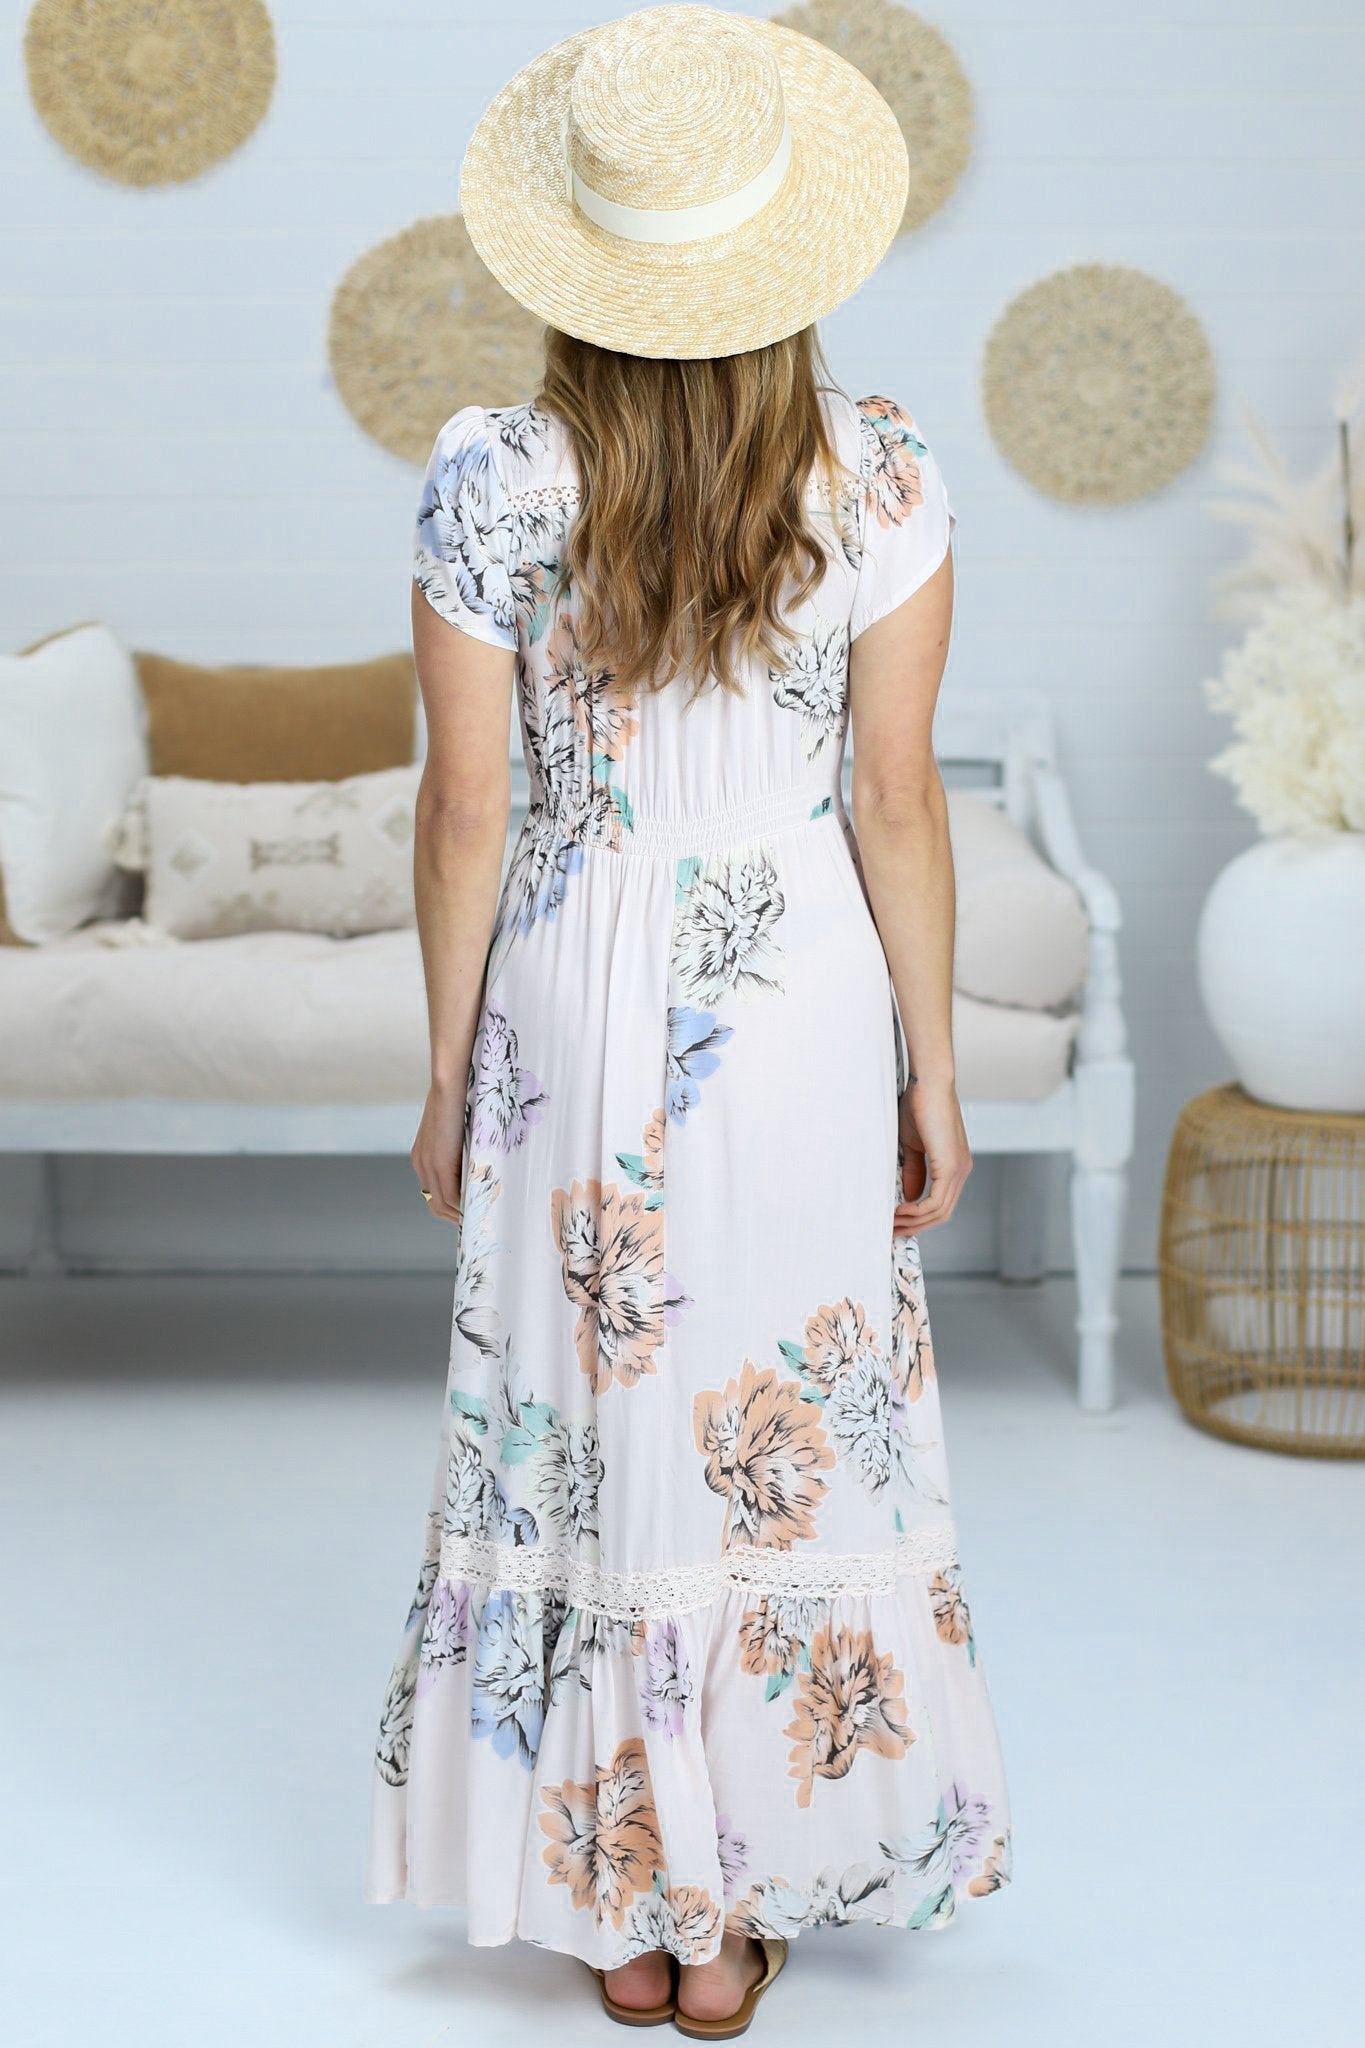 JAASE - Carmen Maxi Dress: Butterfly Cap Sleeve Button Down A Line Dress with Lace Trim in Blooming Bouquet Print